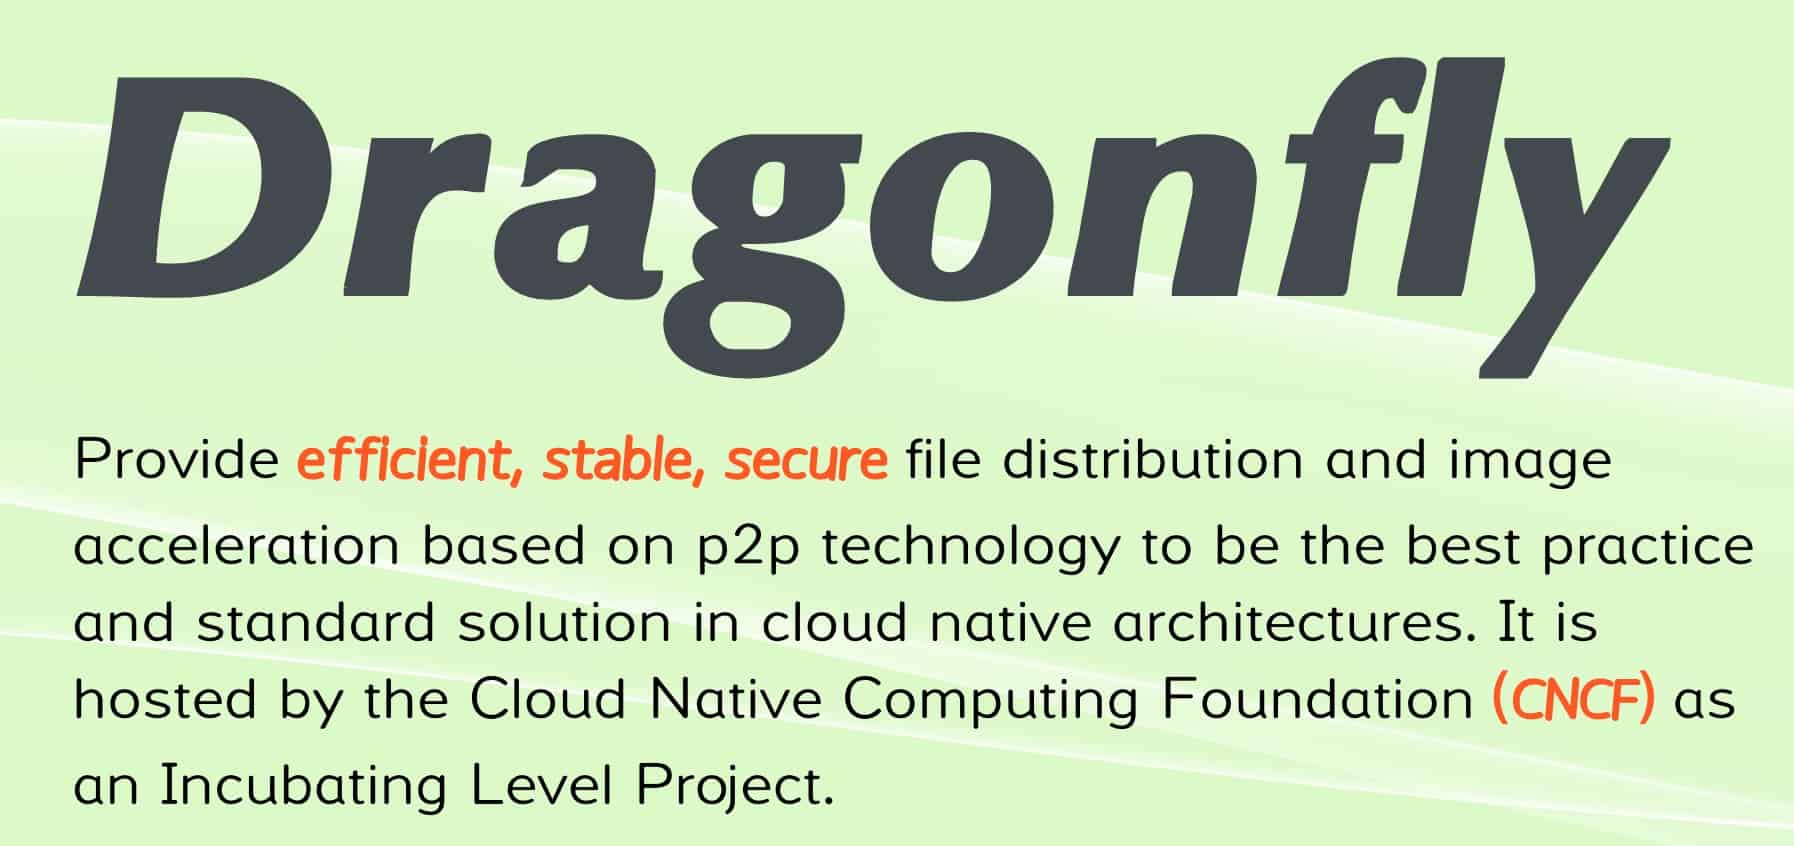 Dragonfly provide efficient, stable, secure file distribution and image acceleration based on p2p technology to be the best practice and standard solution in cloud native architectures. It is hosted by the Cloud Native Computing Foundation (CNCF) as an Incubating Level Project